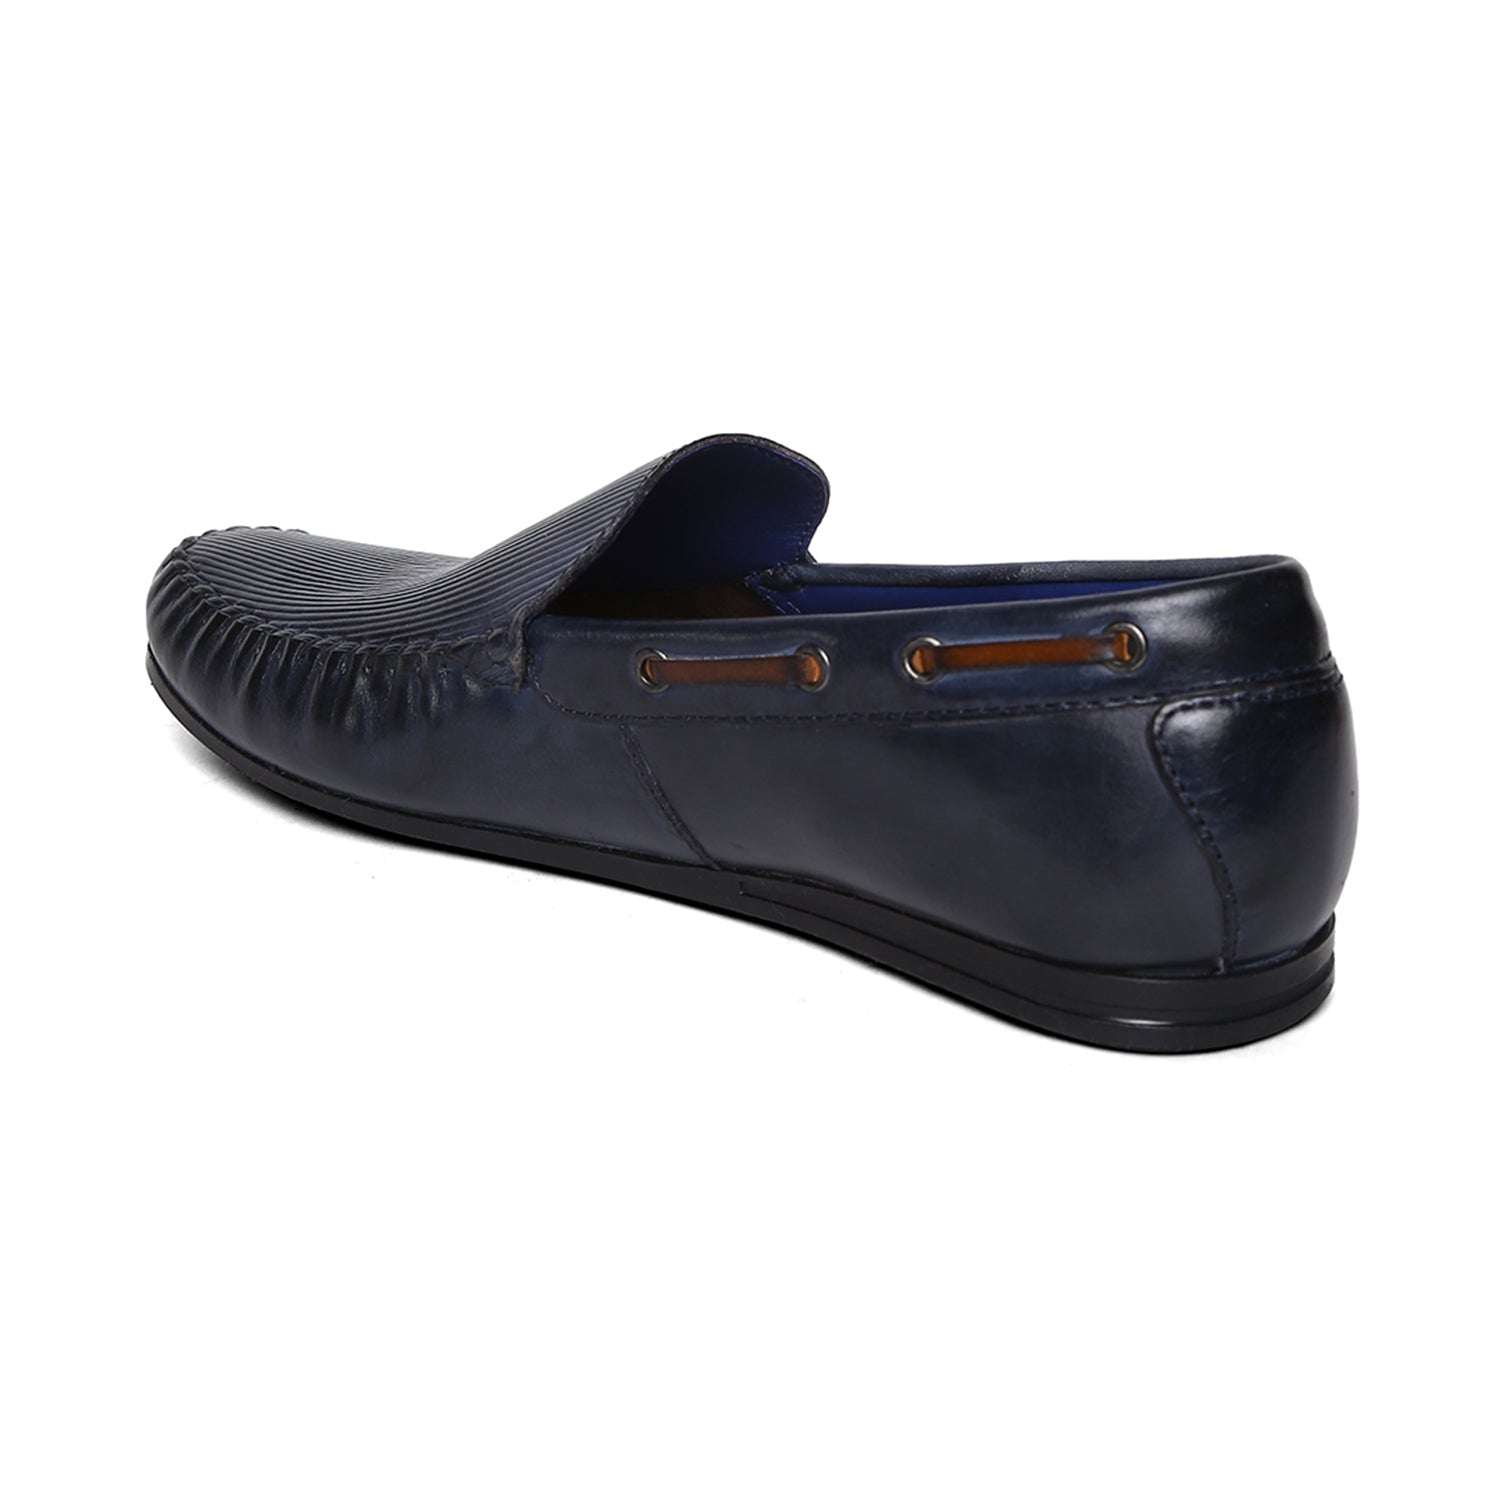 Masabih Genuine Leather Navy Mocassin Shoes with Flat Sole for Men